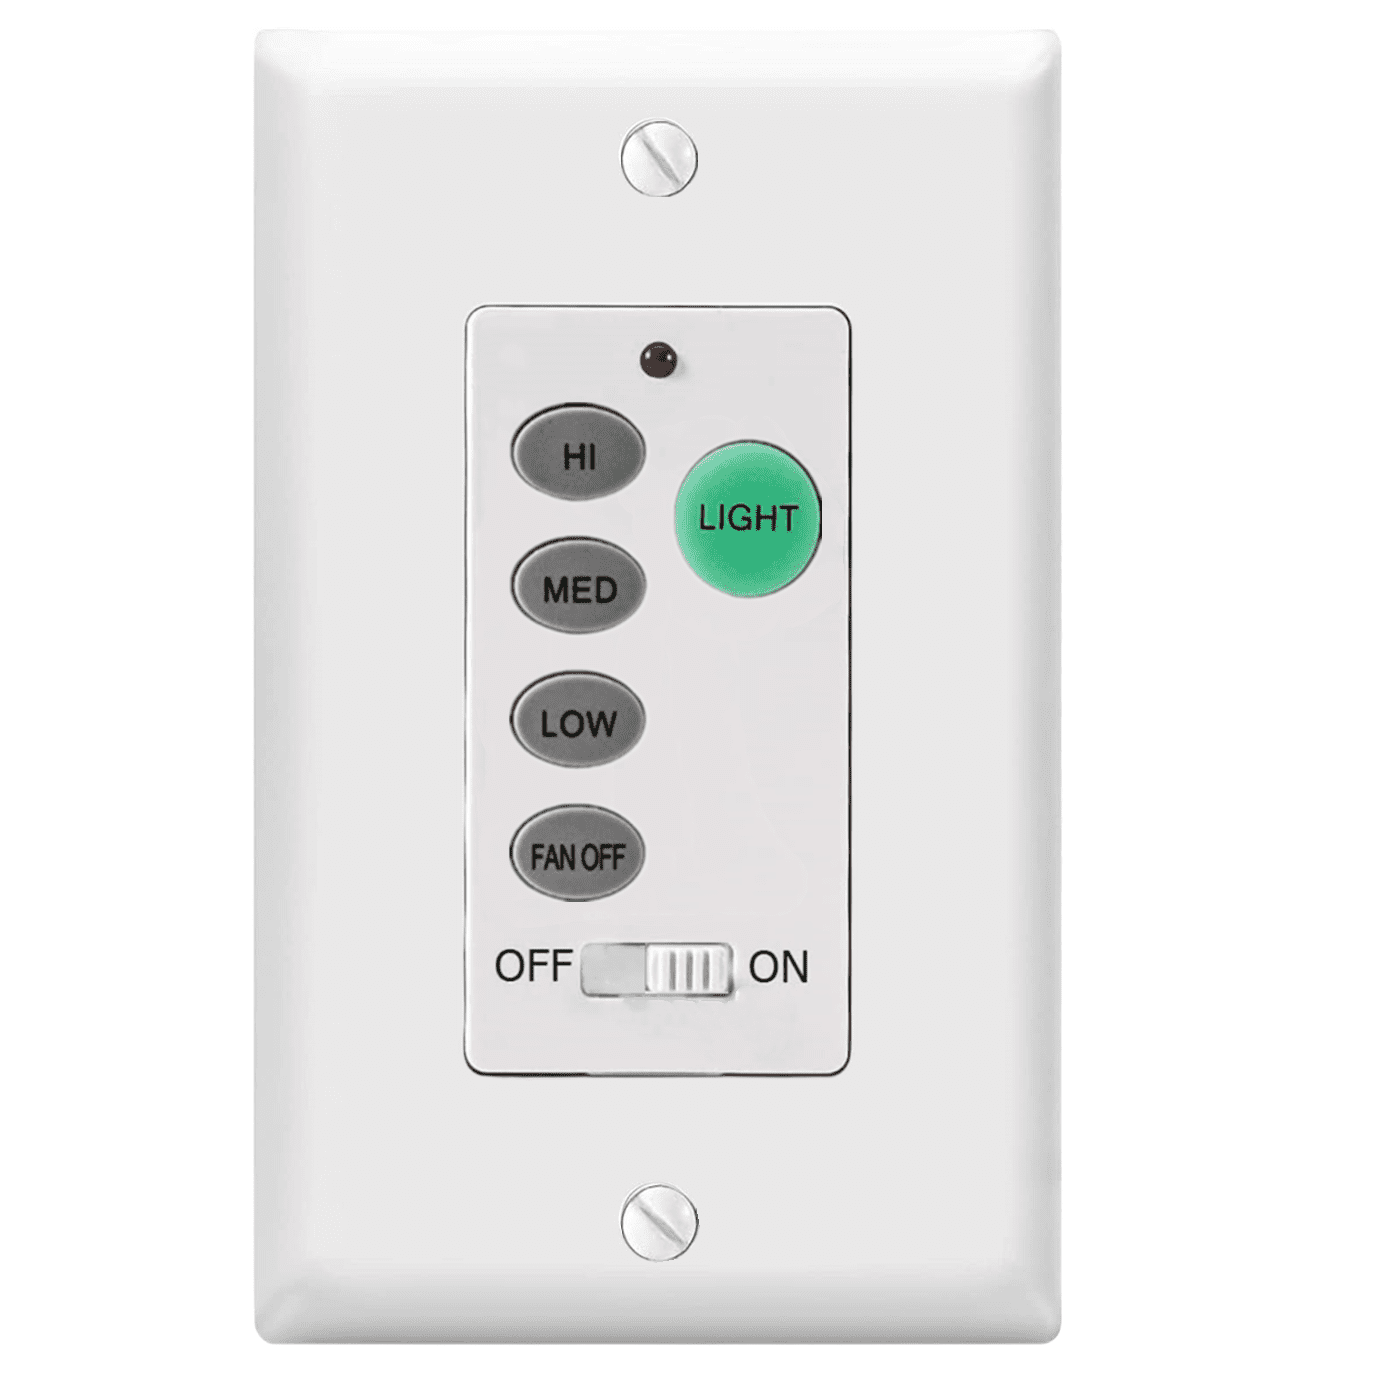 Universal Uc9050t Ceiling Fan Wall Remote Control Dip Switch With Adjule 3 Sd Light Dimmer Requires Receiver No Included Compatible Hampton Bay Harbor Breeze Hunter Com